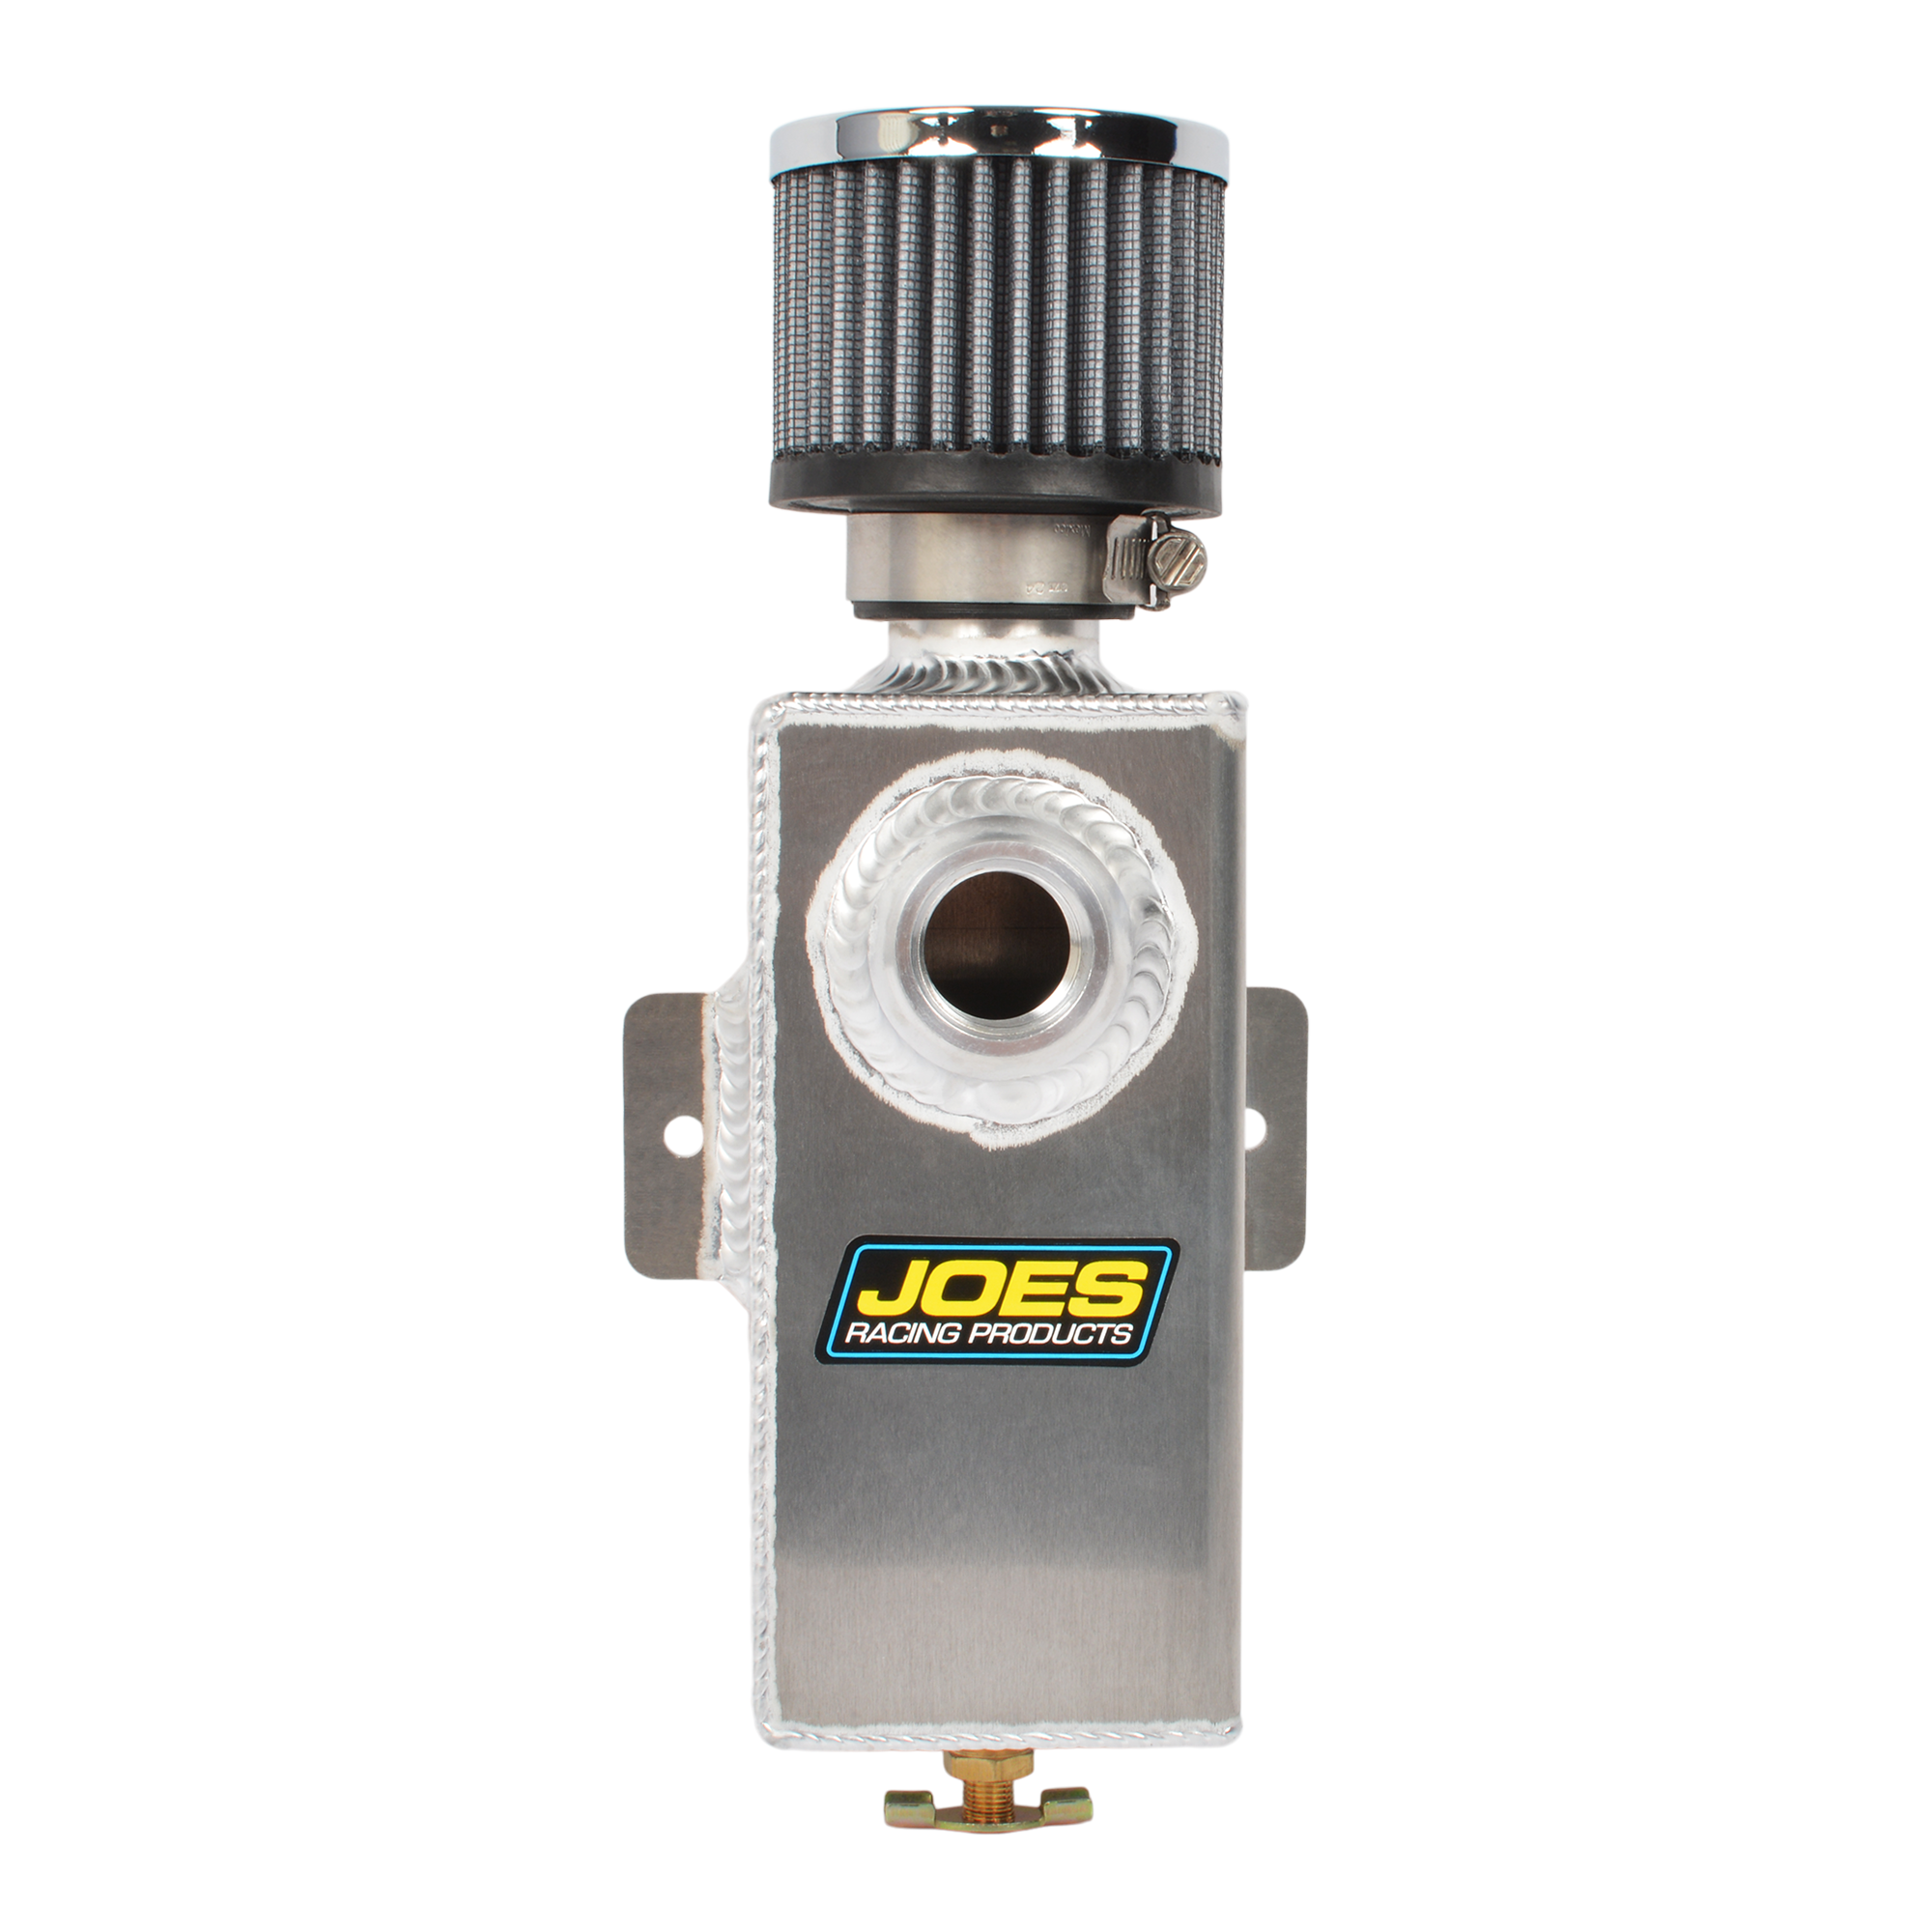 JOES Dry Sump Breather Tank